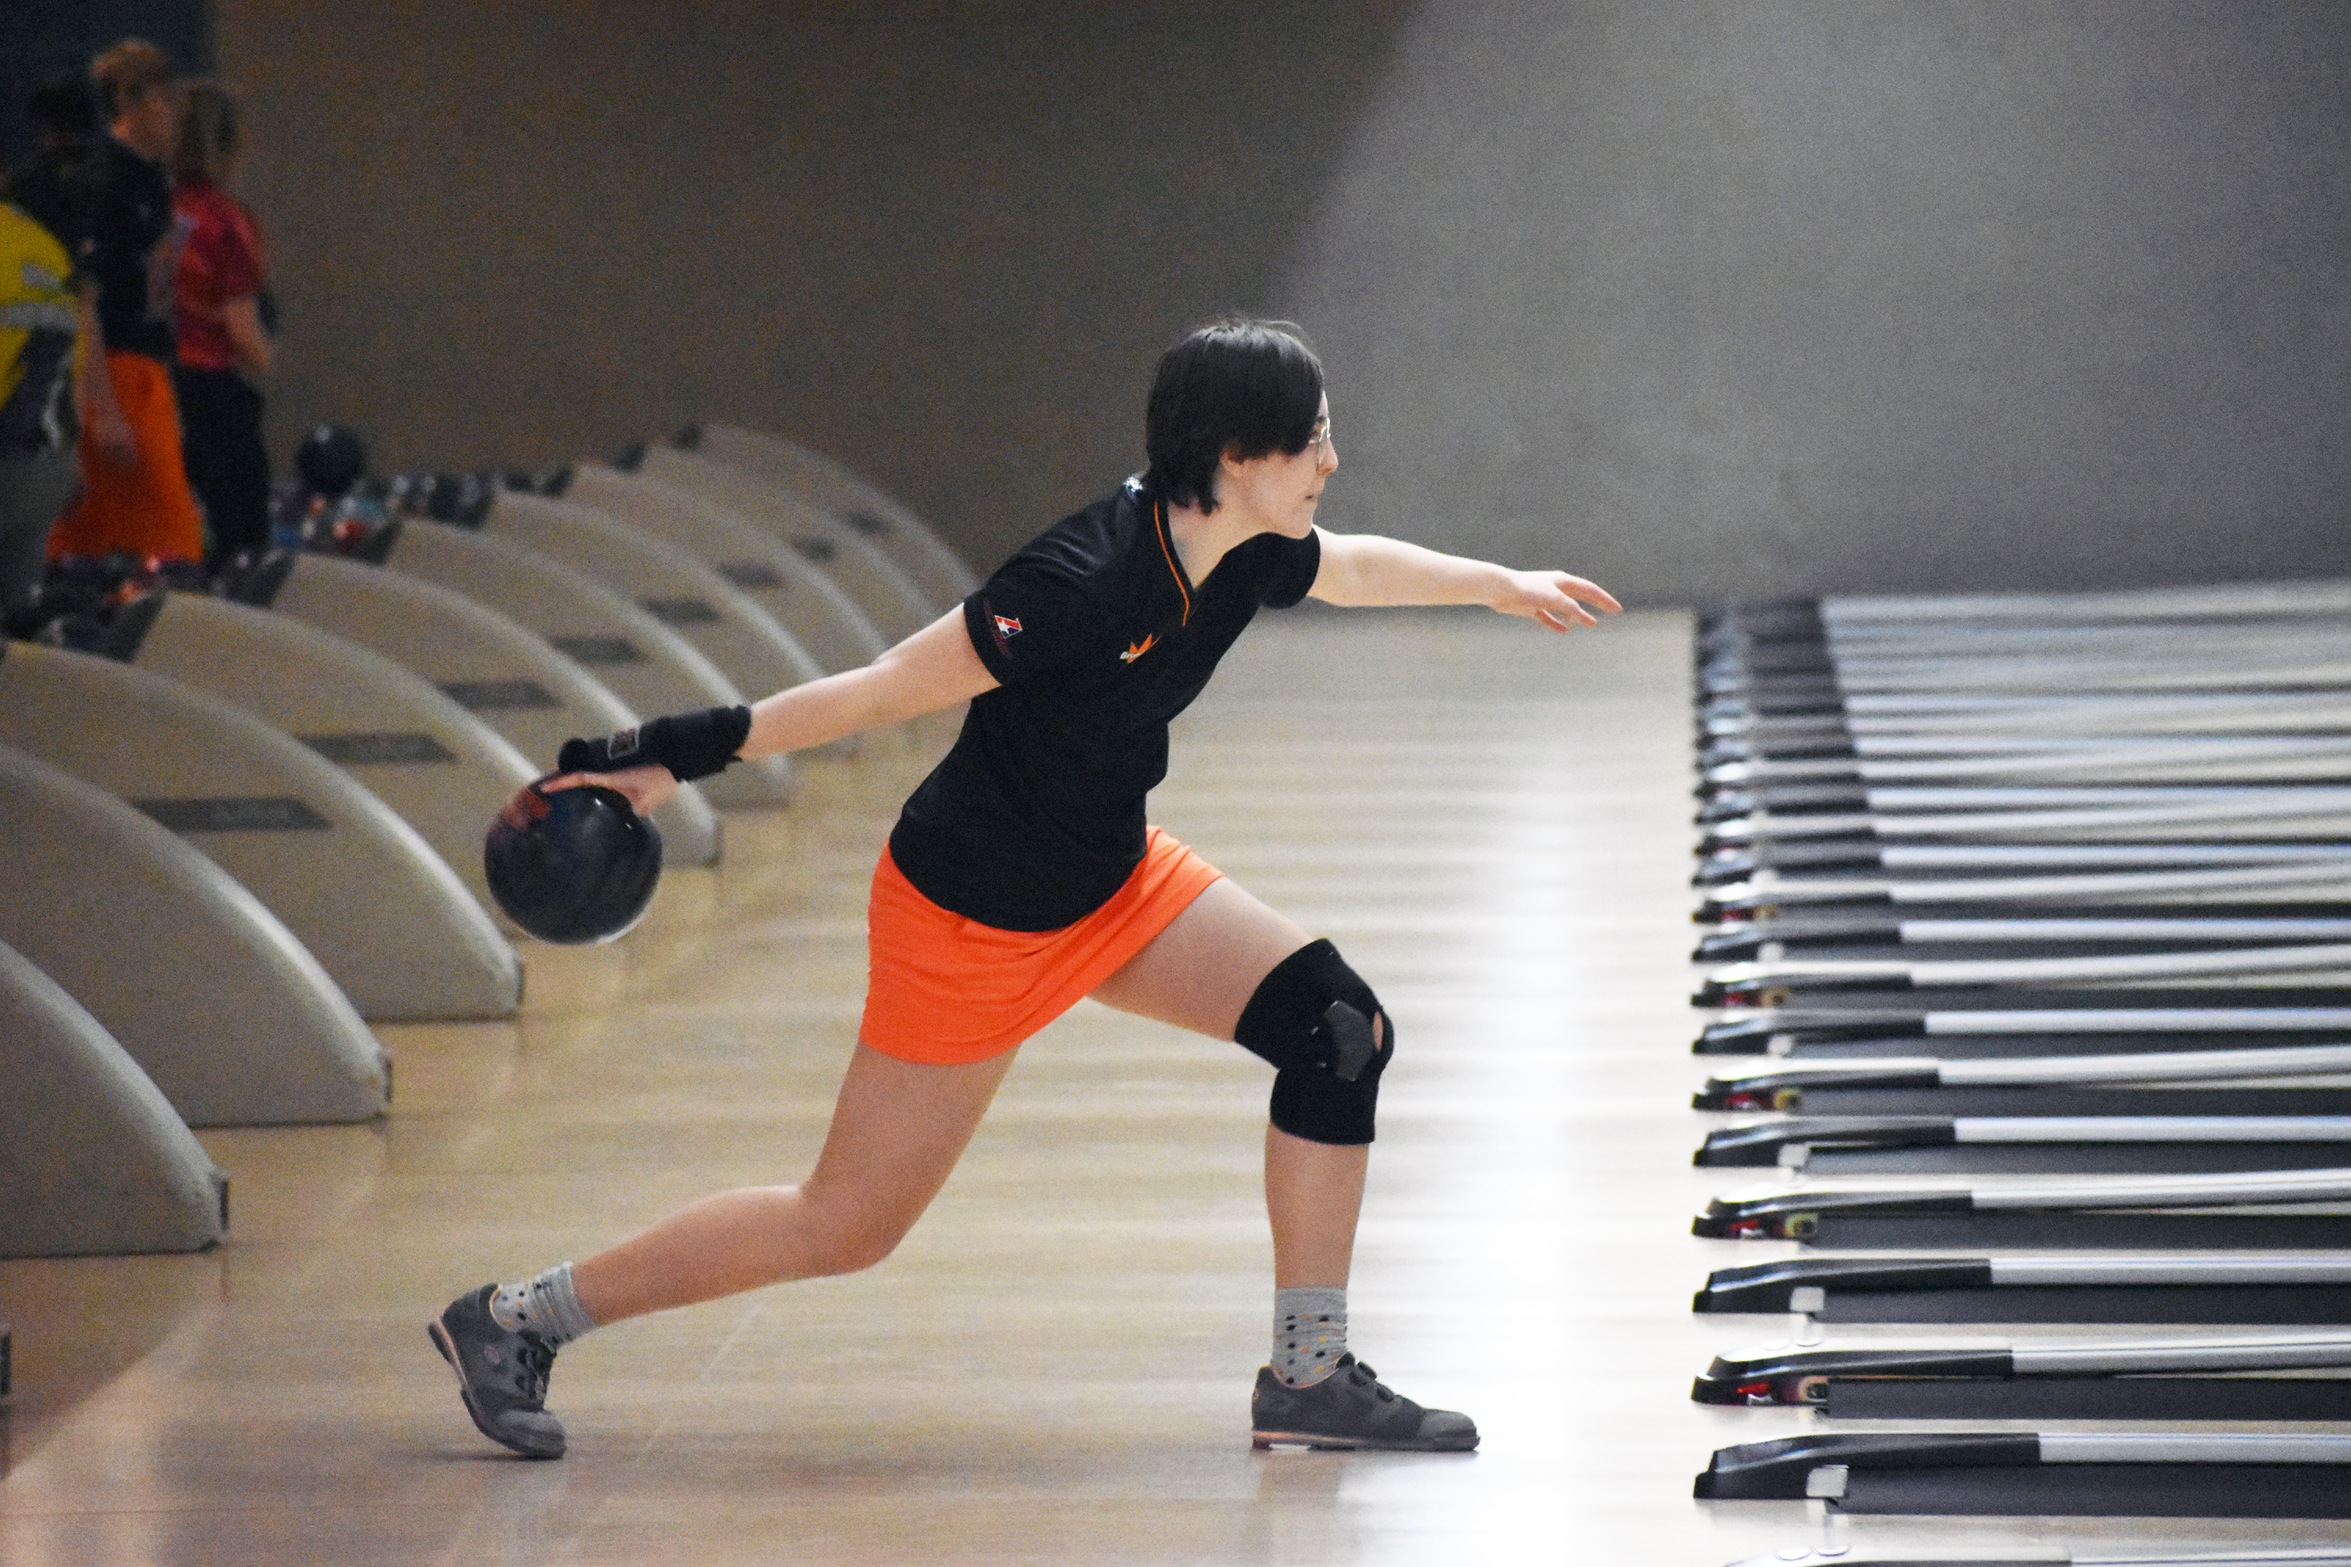 2023 NAIA Women's Bowling All-America Teams Released